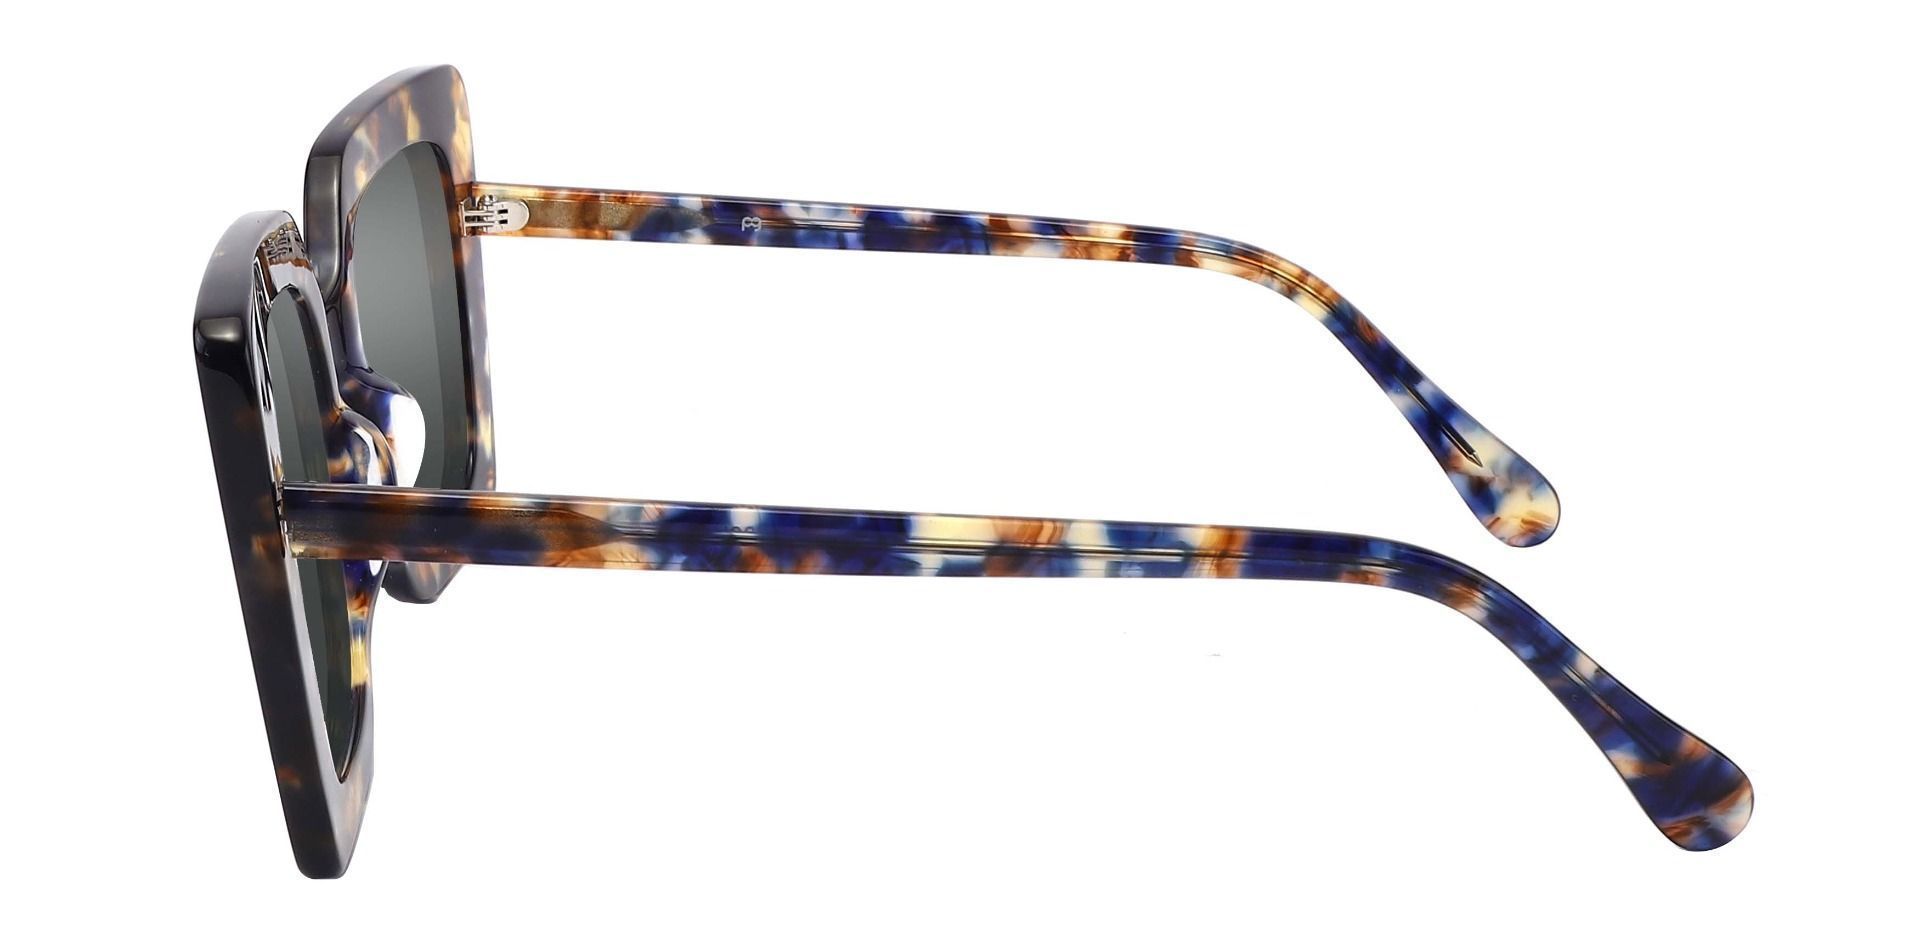 Rowland Square Reading Sunglasses - Floral Frame With Gray Lenses